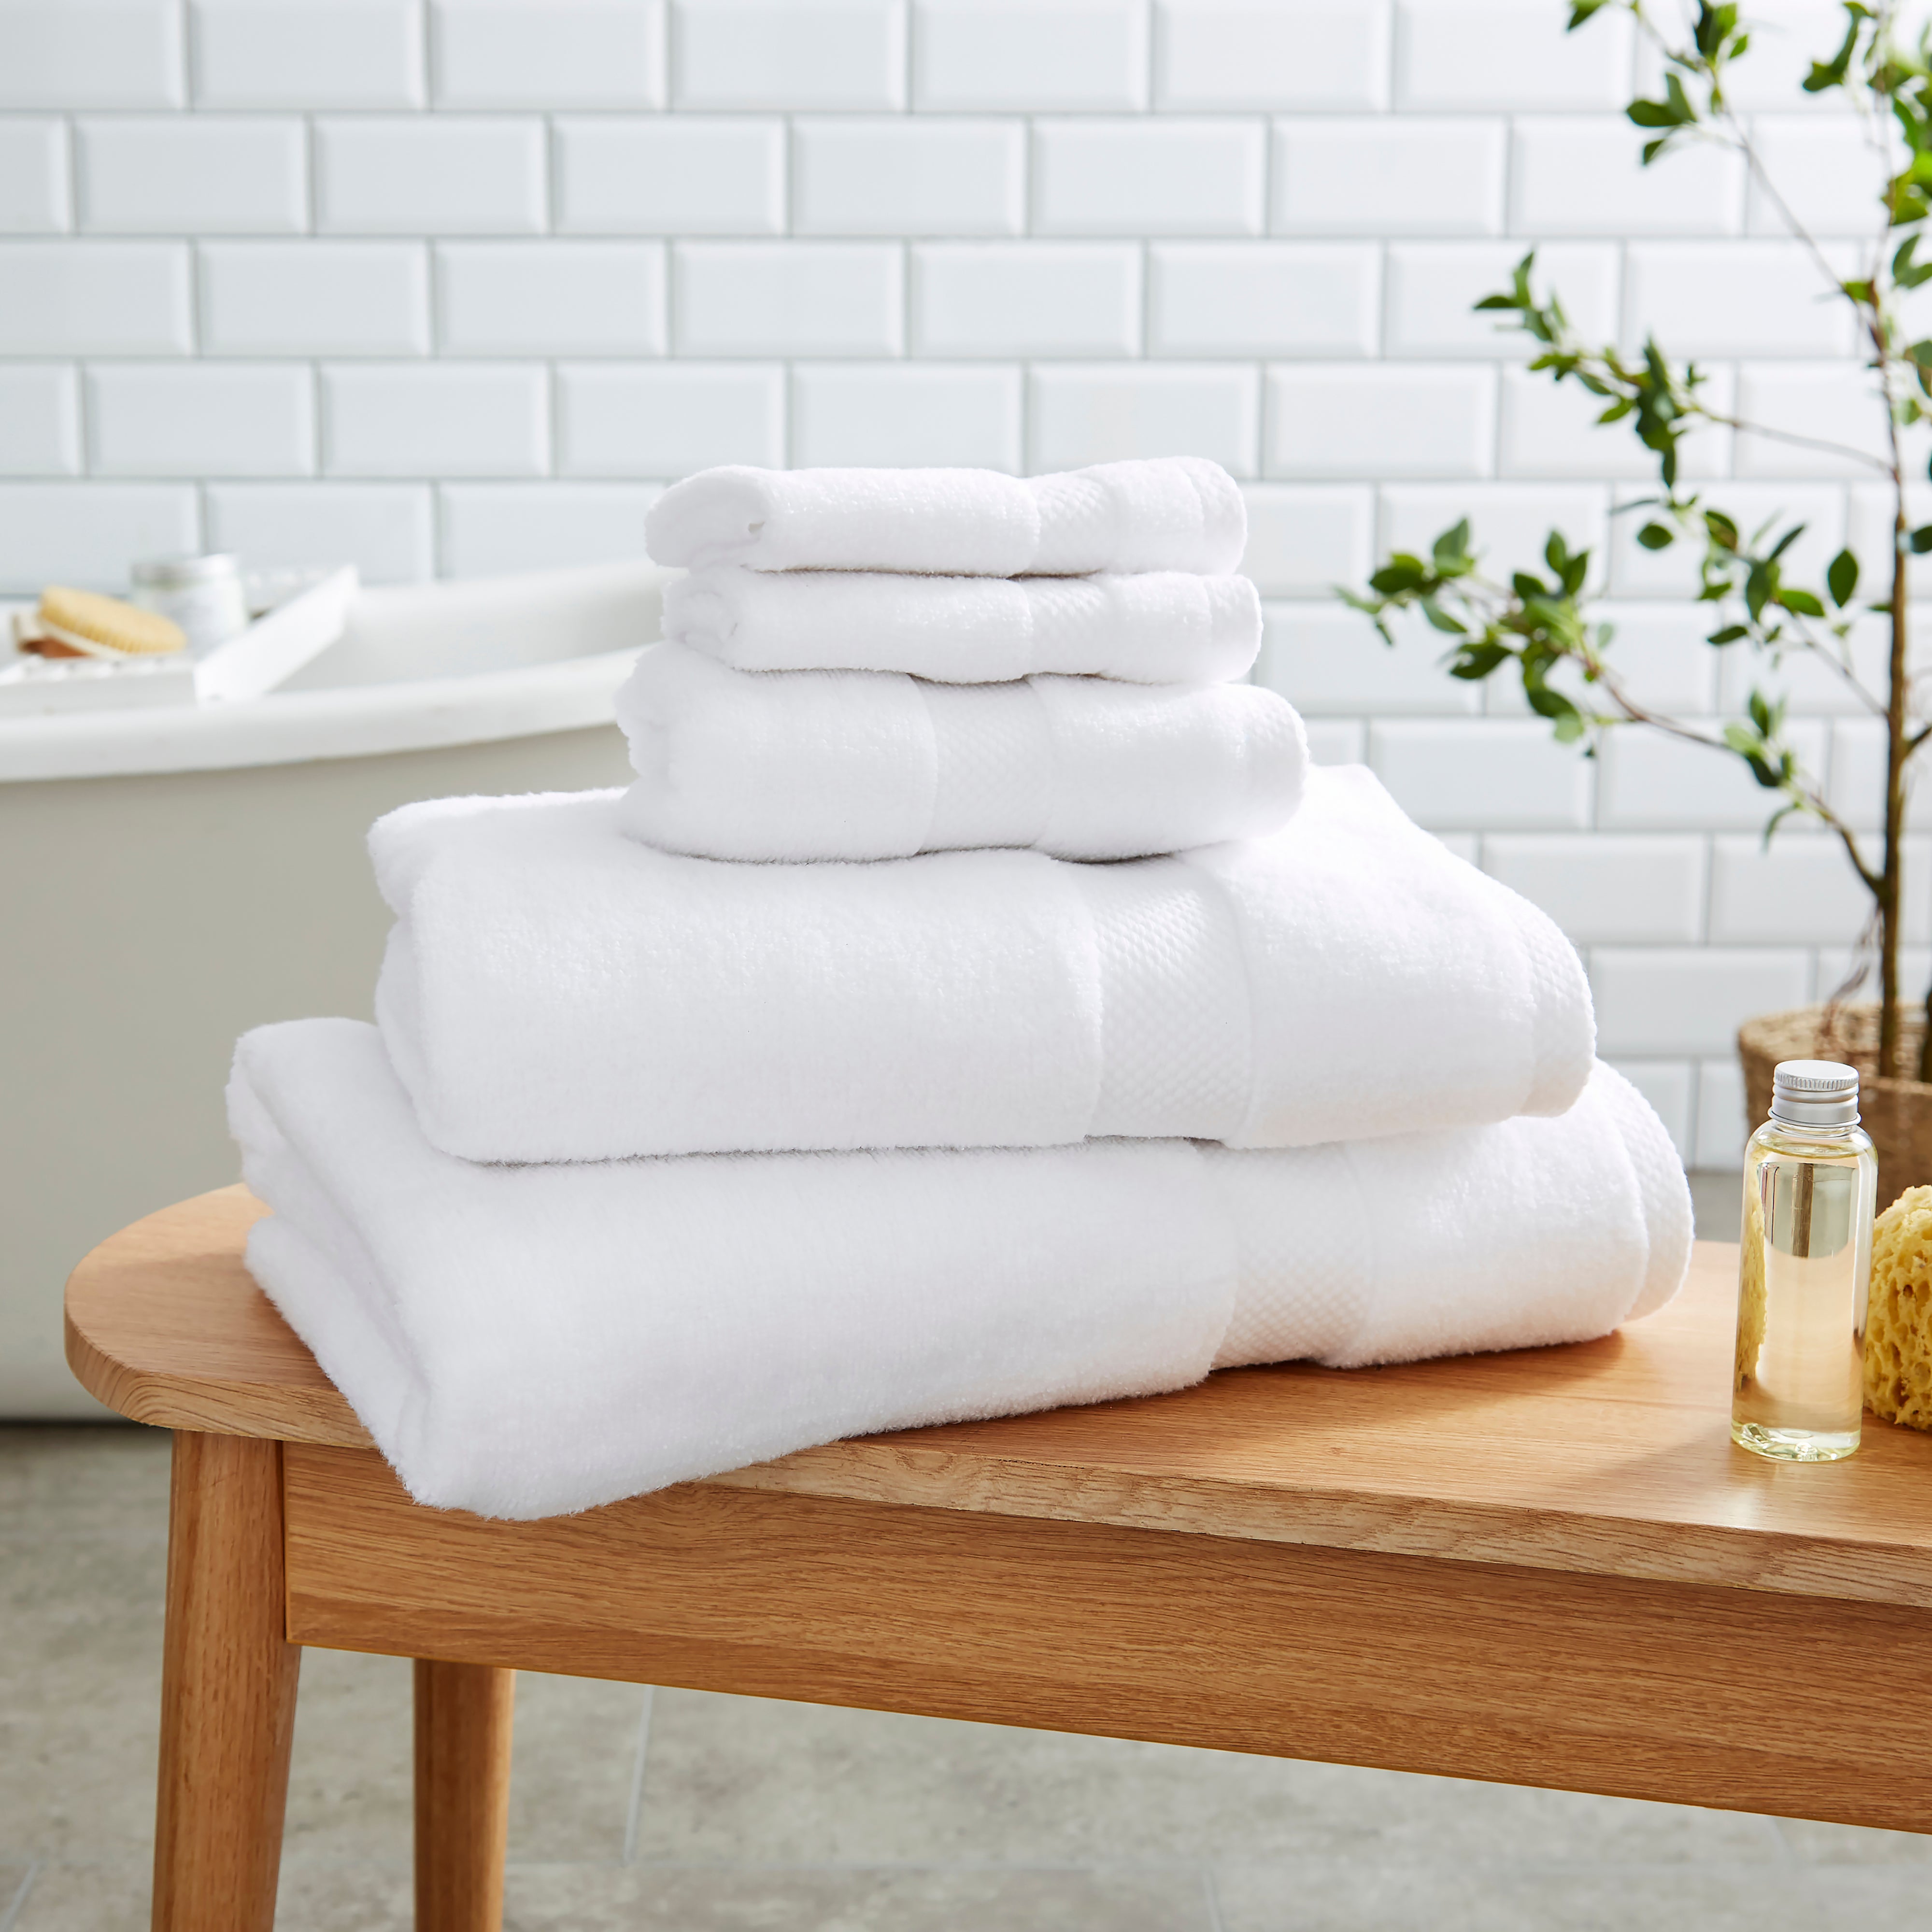 Soft and Fluffy 100% Cotton White Towel